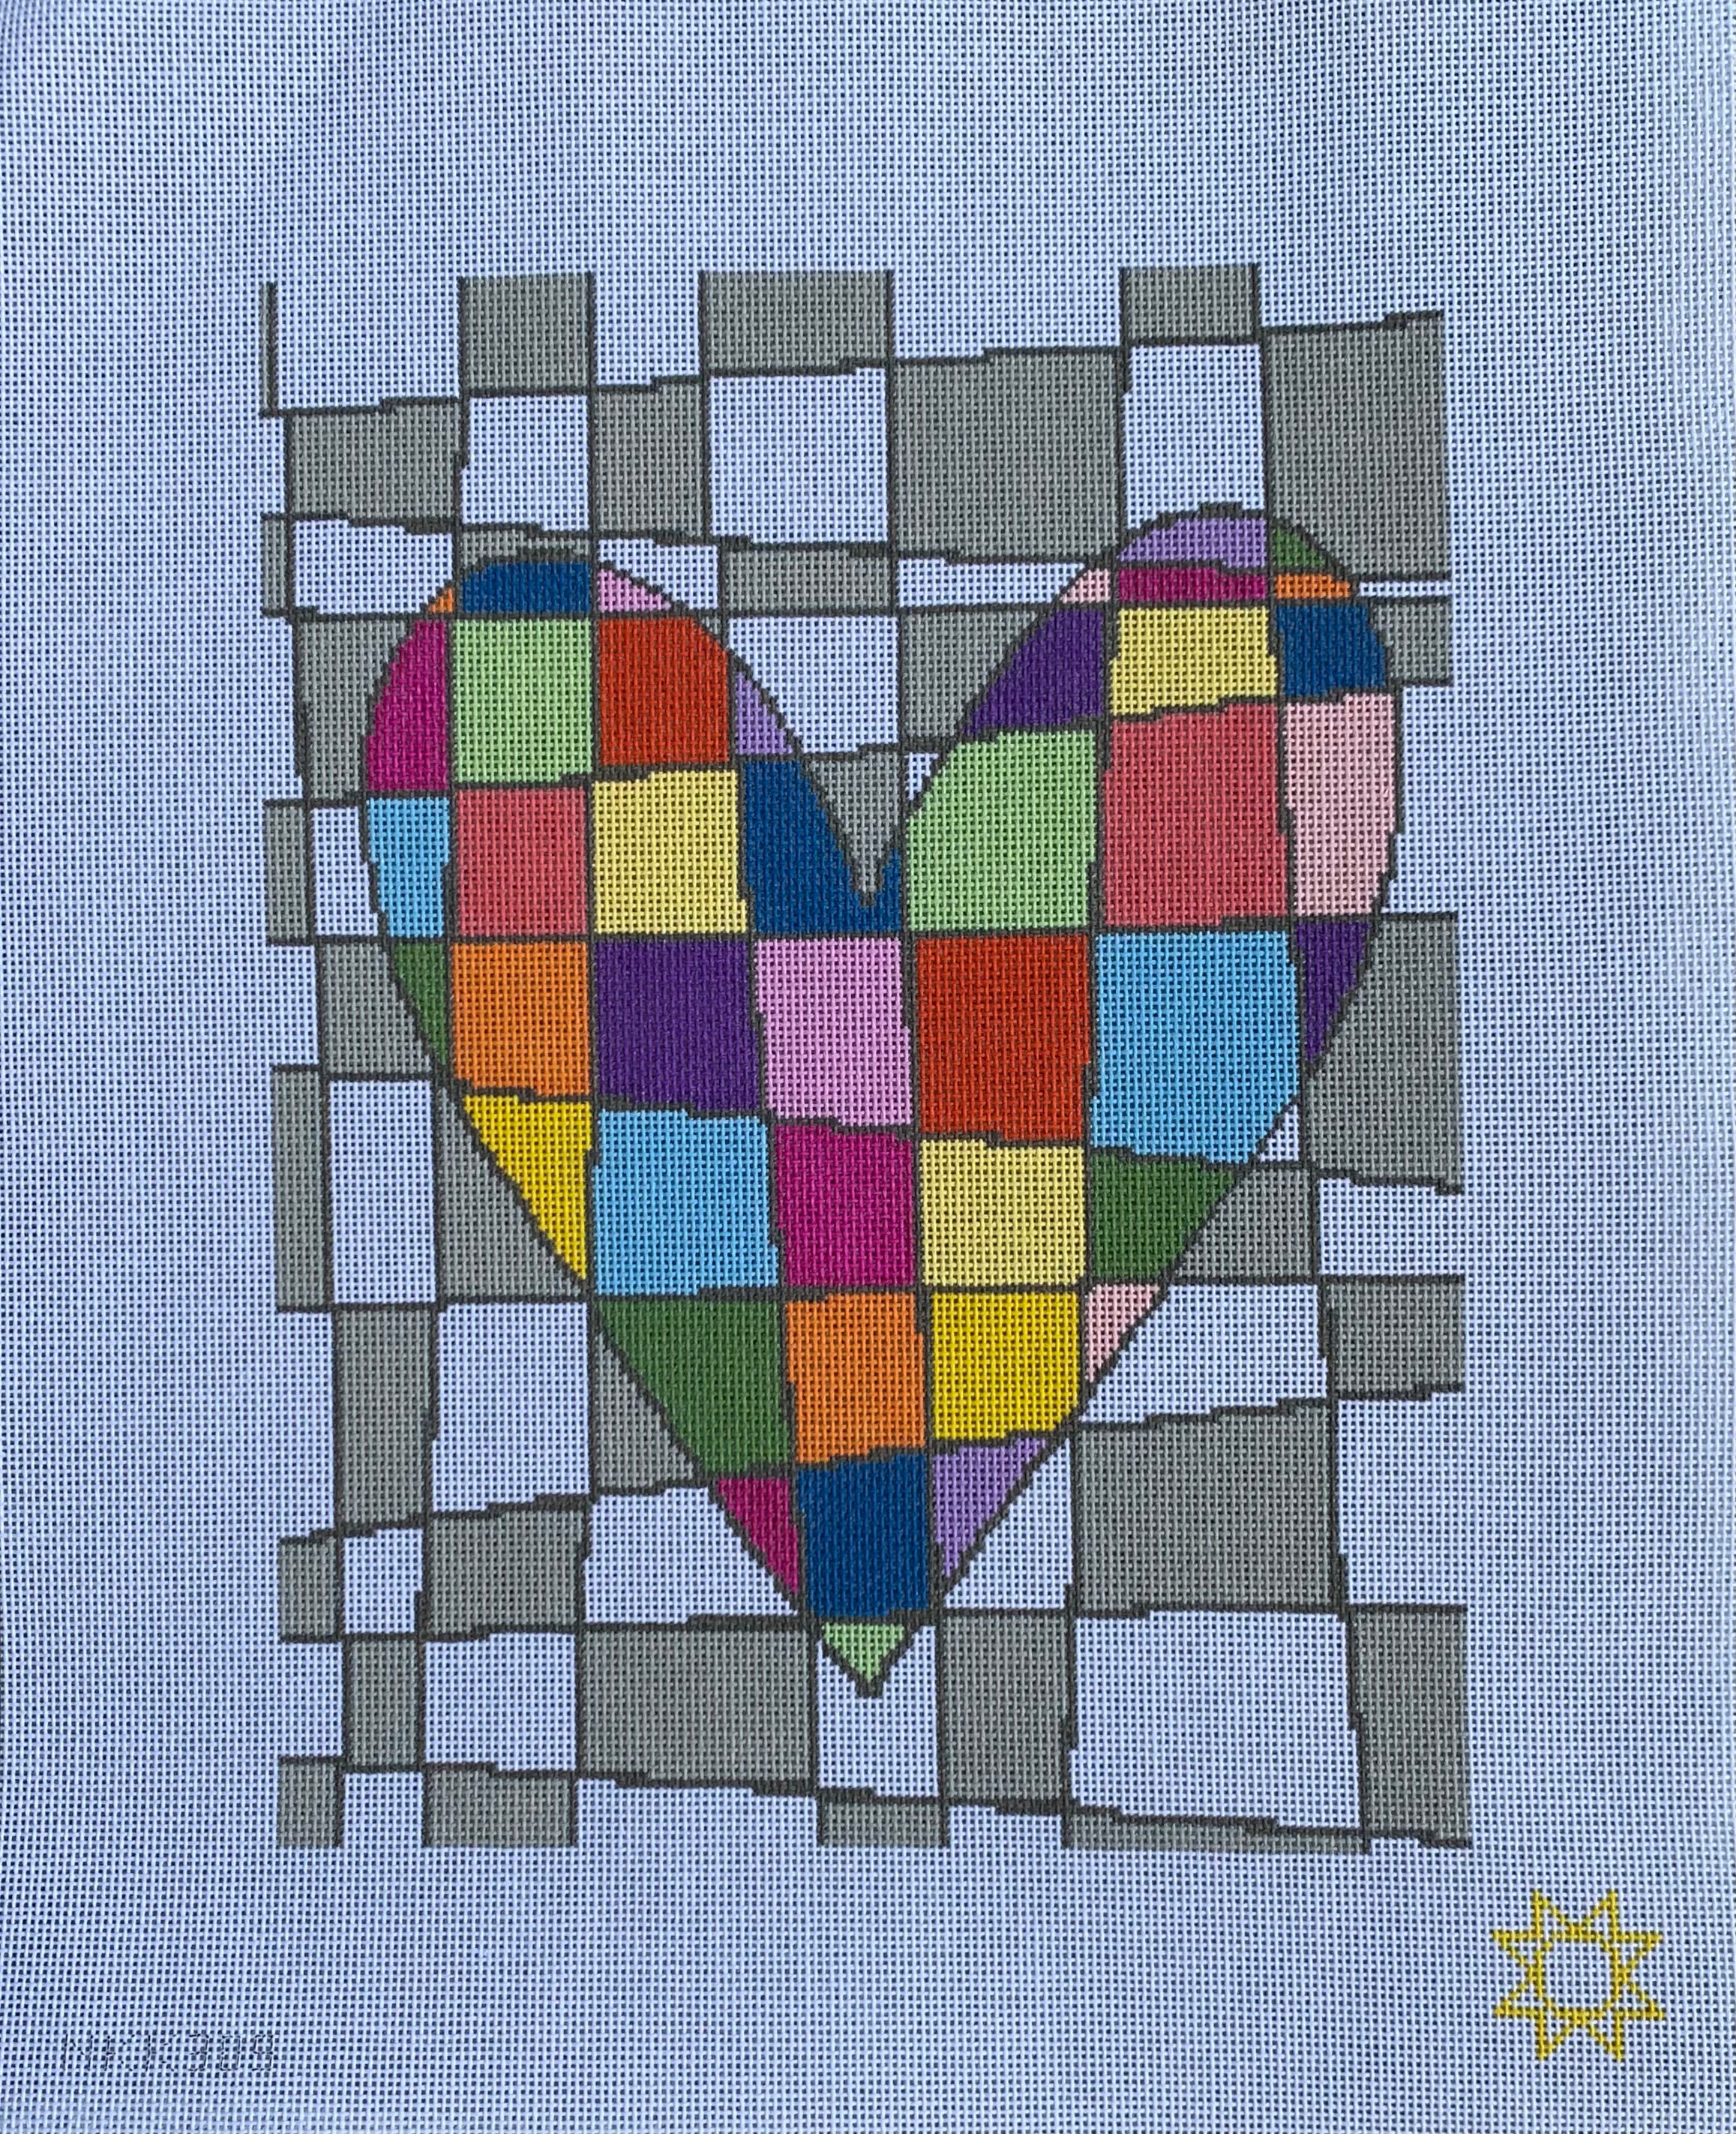 Hearts and Squares NKK309